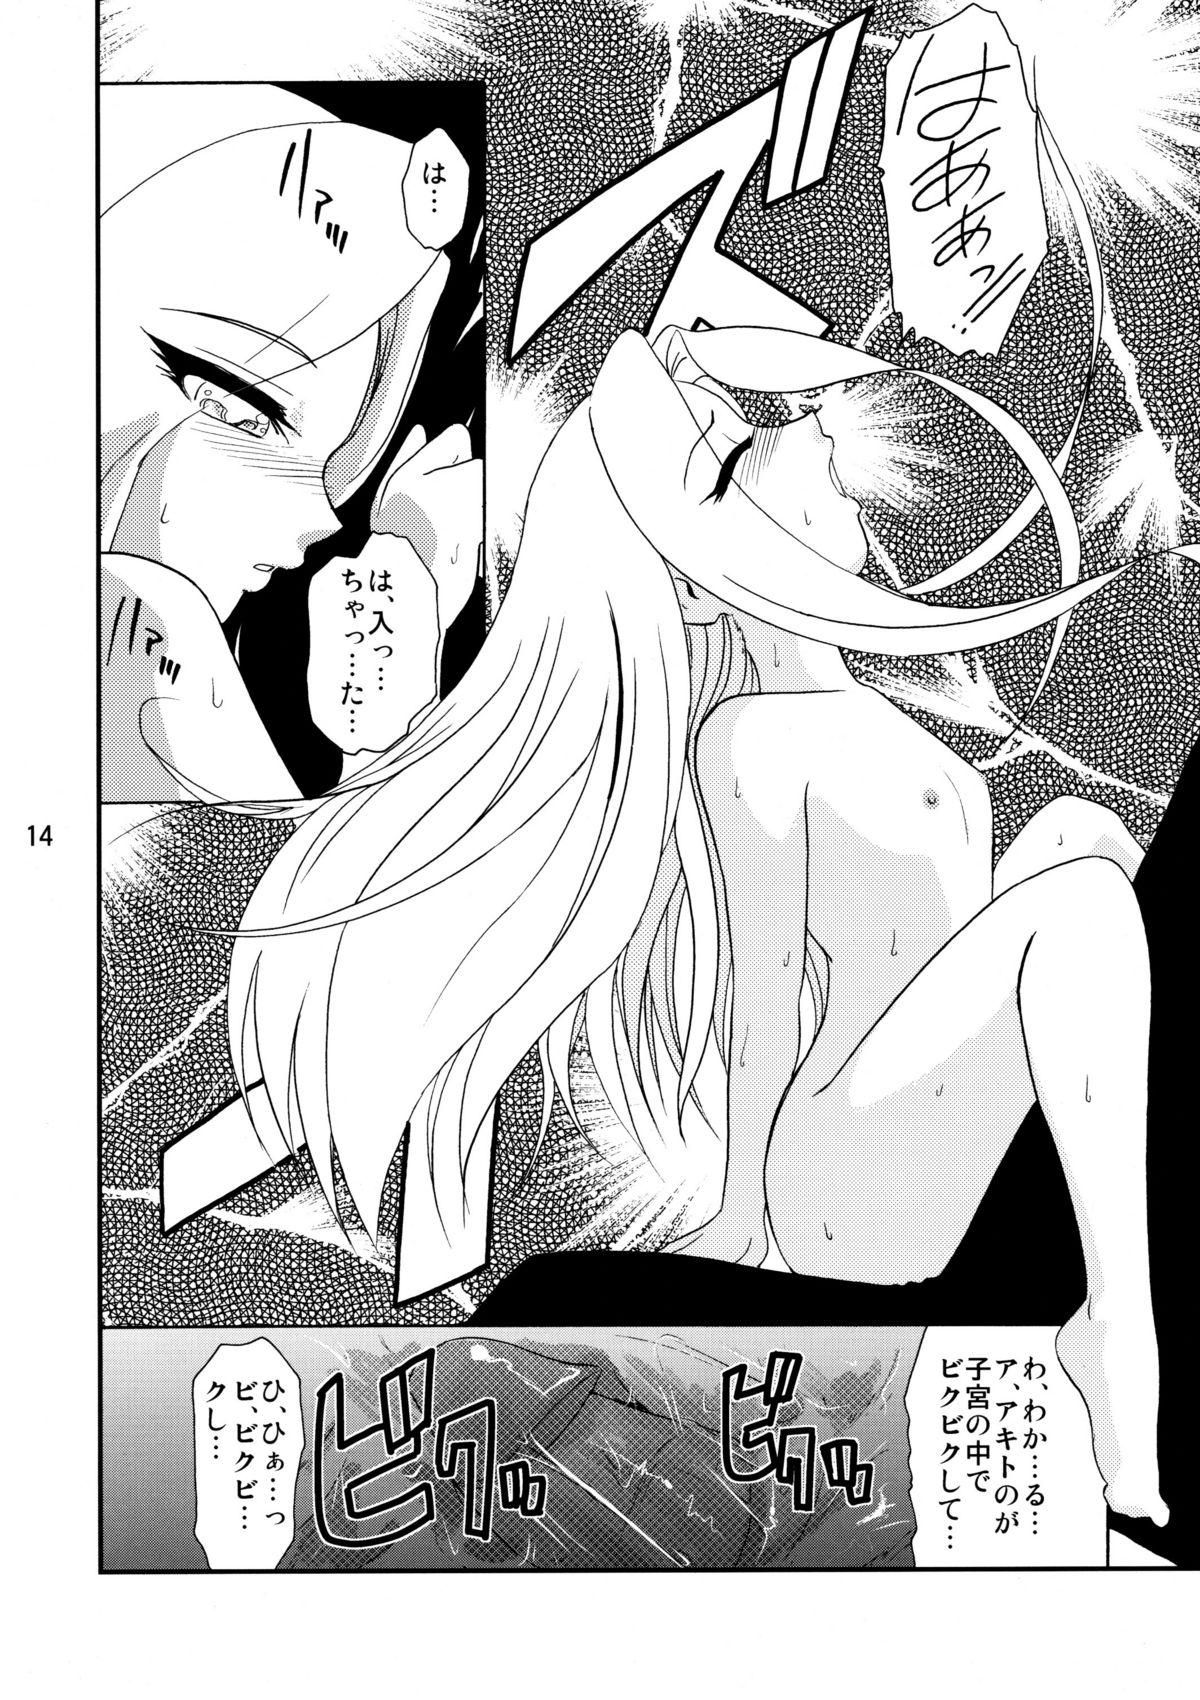 Sapphic Princess of Darkness - Martian successor nadesico Face - Page 13